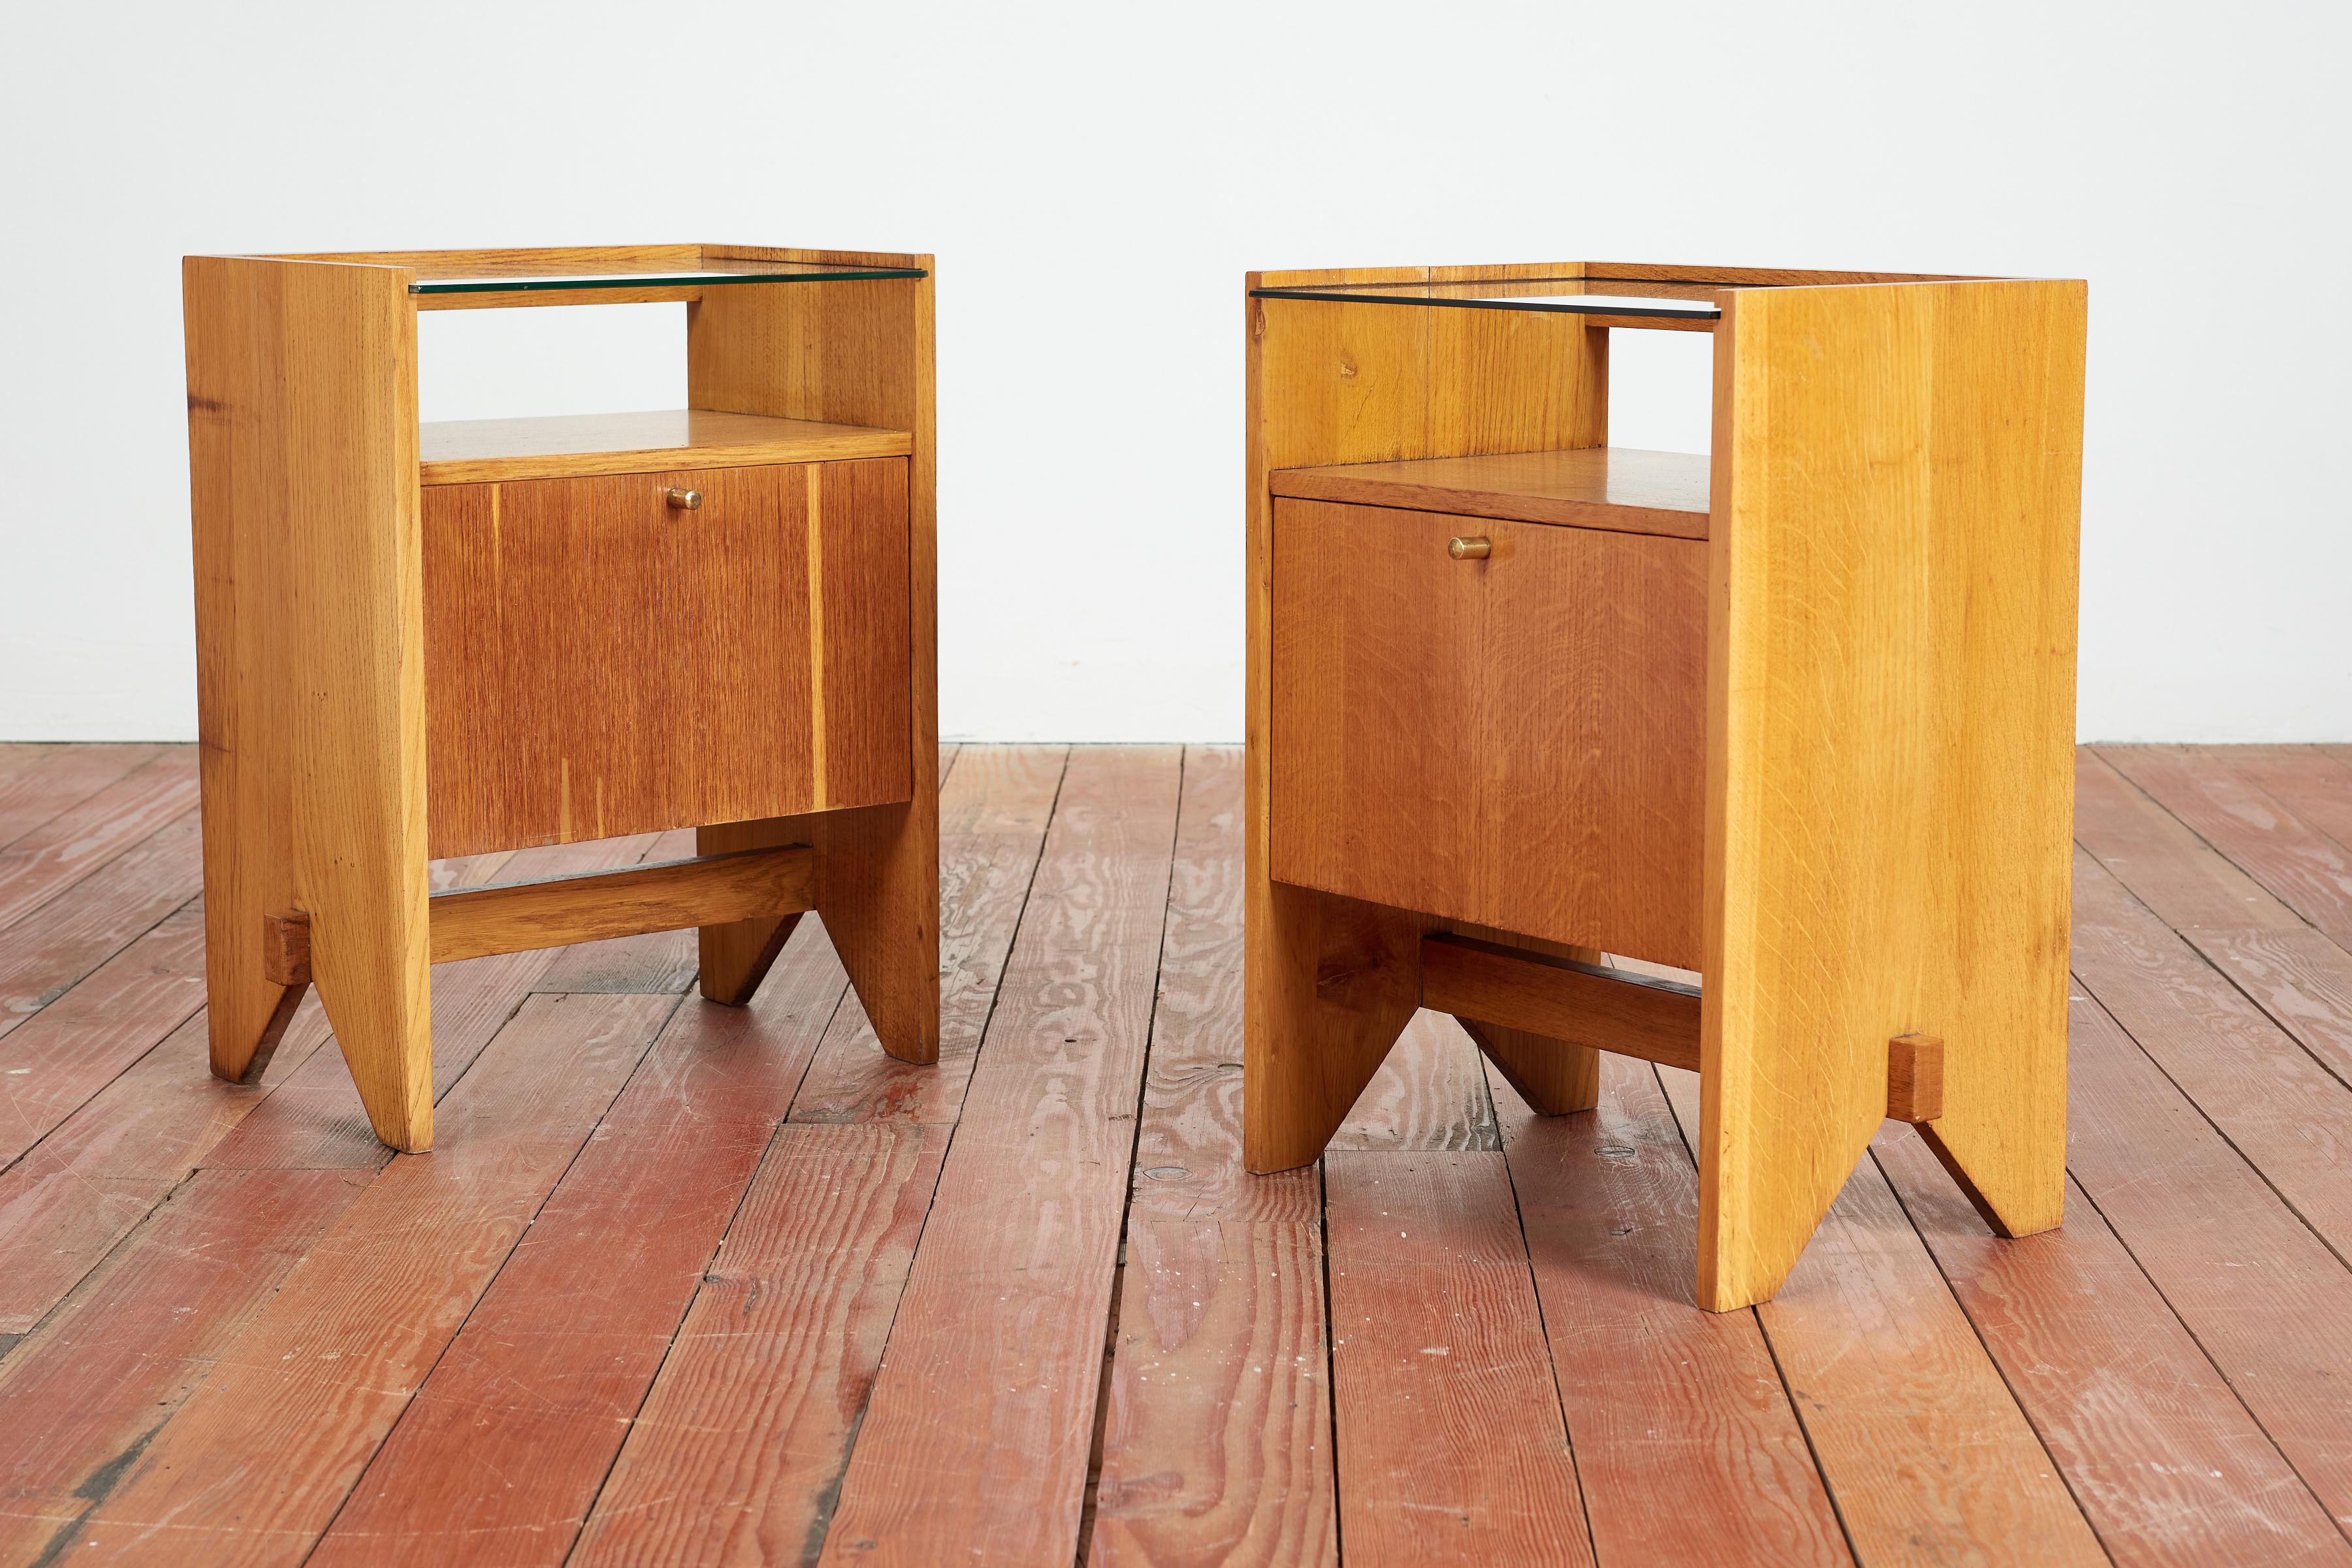 Wonderful pair of end tables ISA Bergamo in oak wood, brass with glass shelf and open compartment for storage.

Great angular leg shape and functional design. 

Turn, Italy - 1955

Produced for Einaudi College. ISA production,